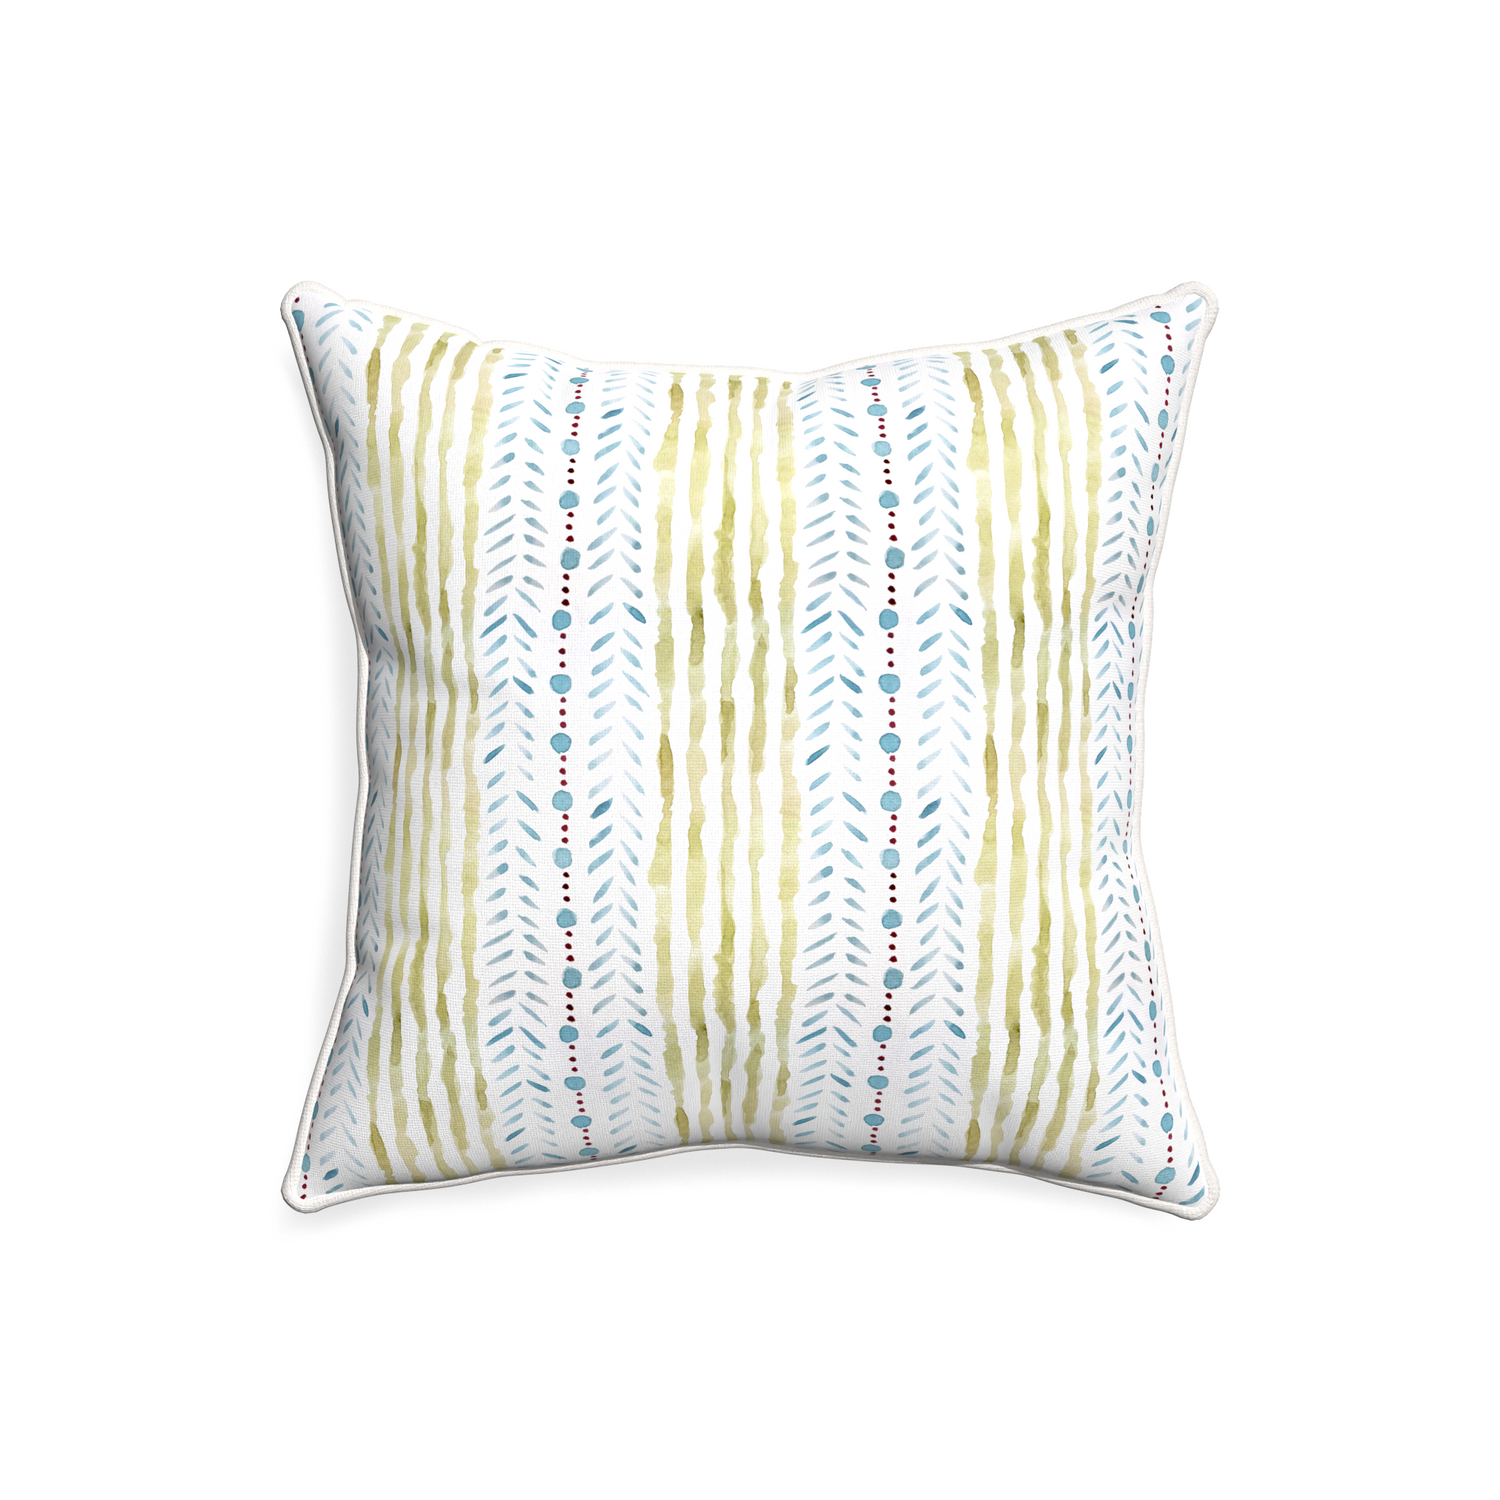 20-square julia custom blue & green stripedpillow with snow piping on white background